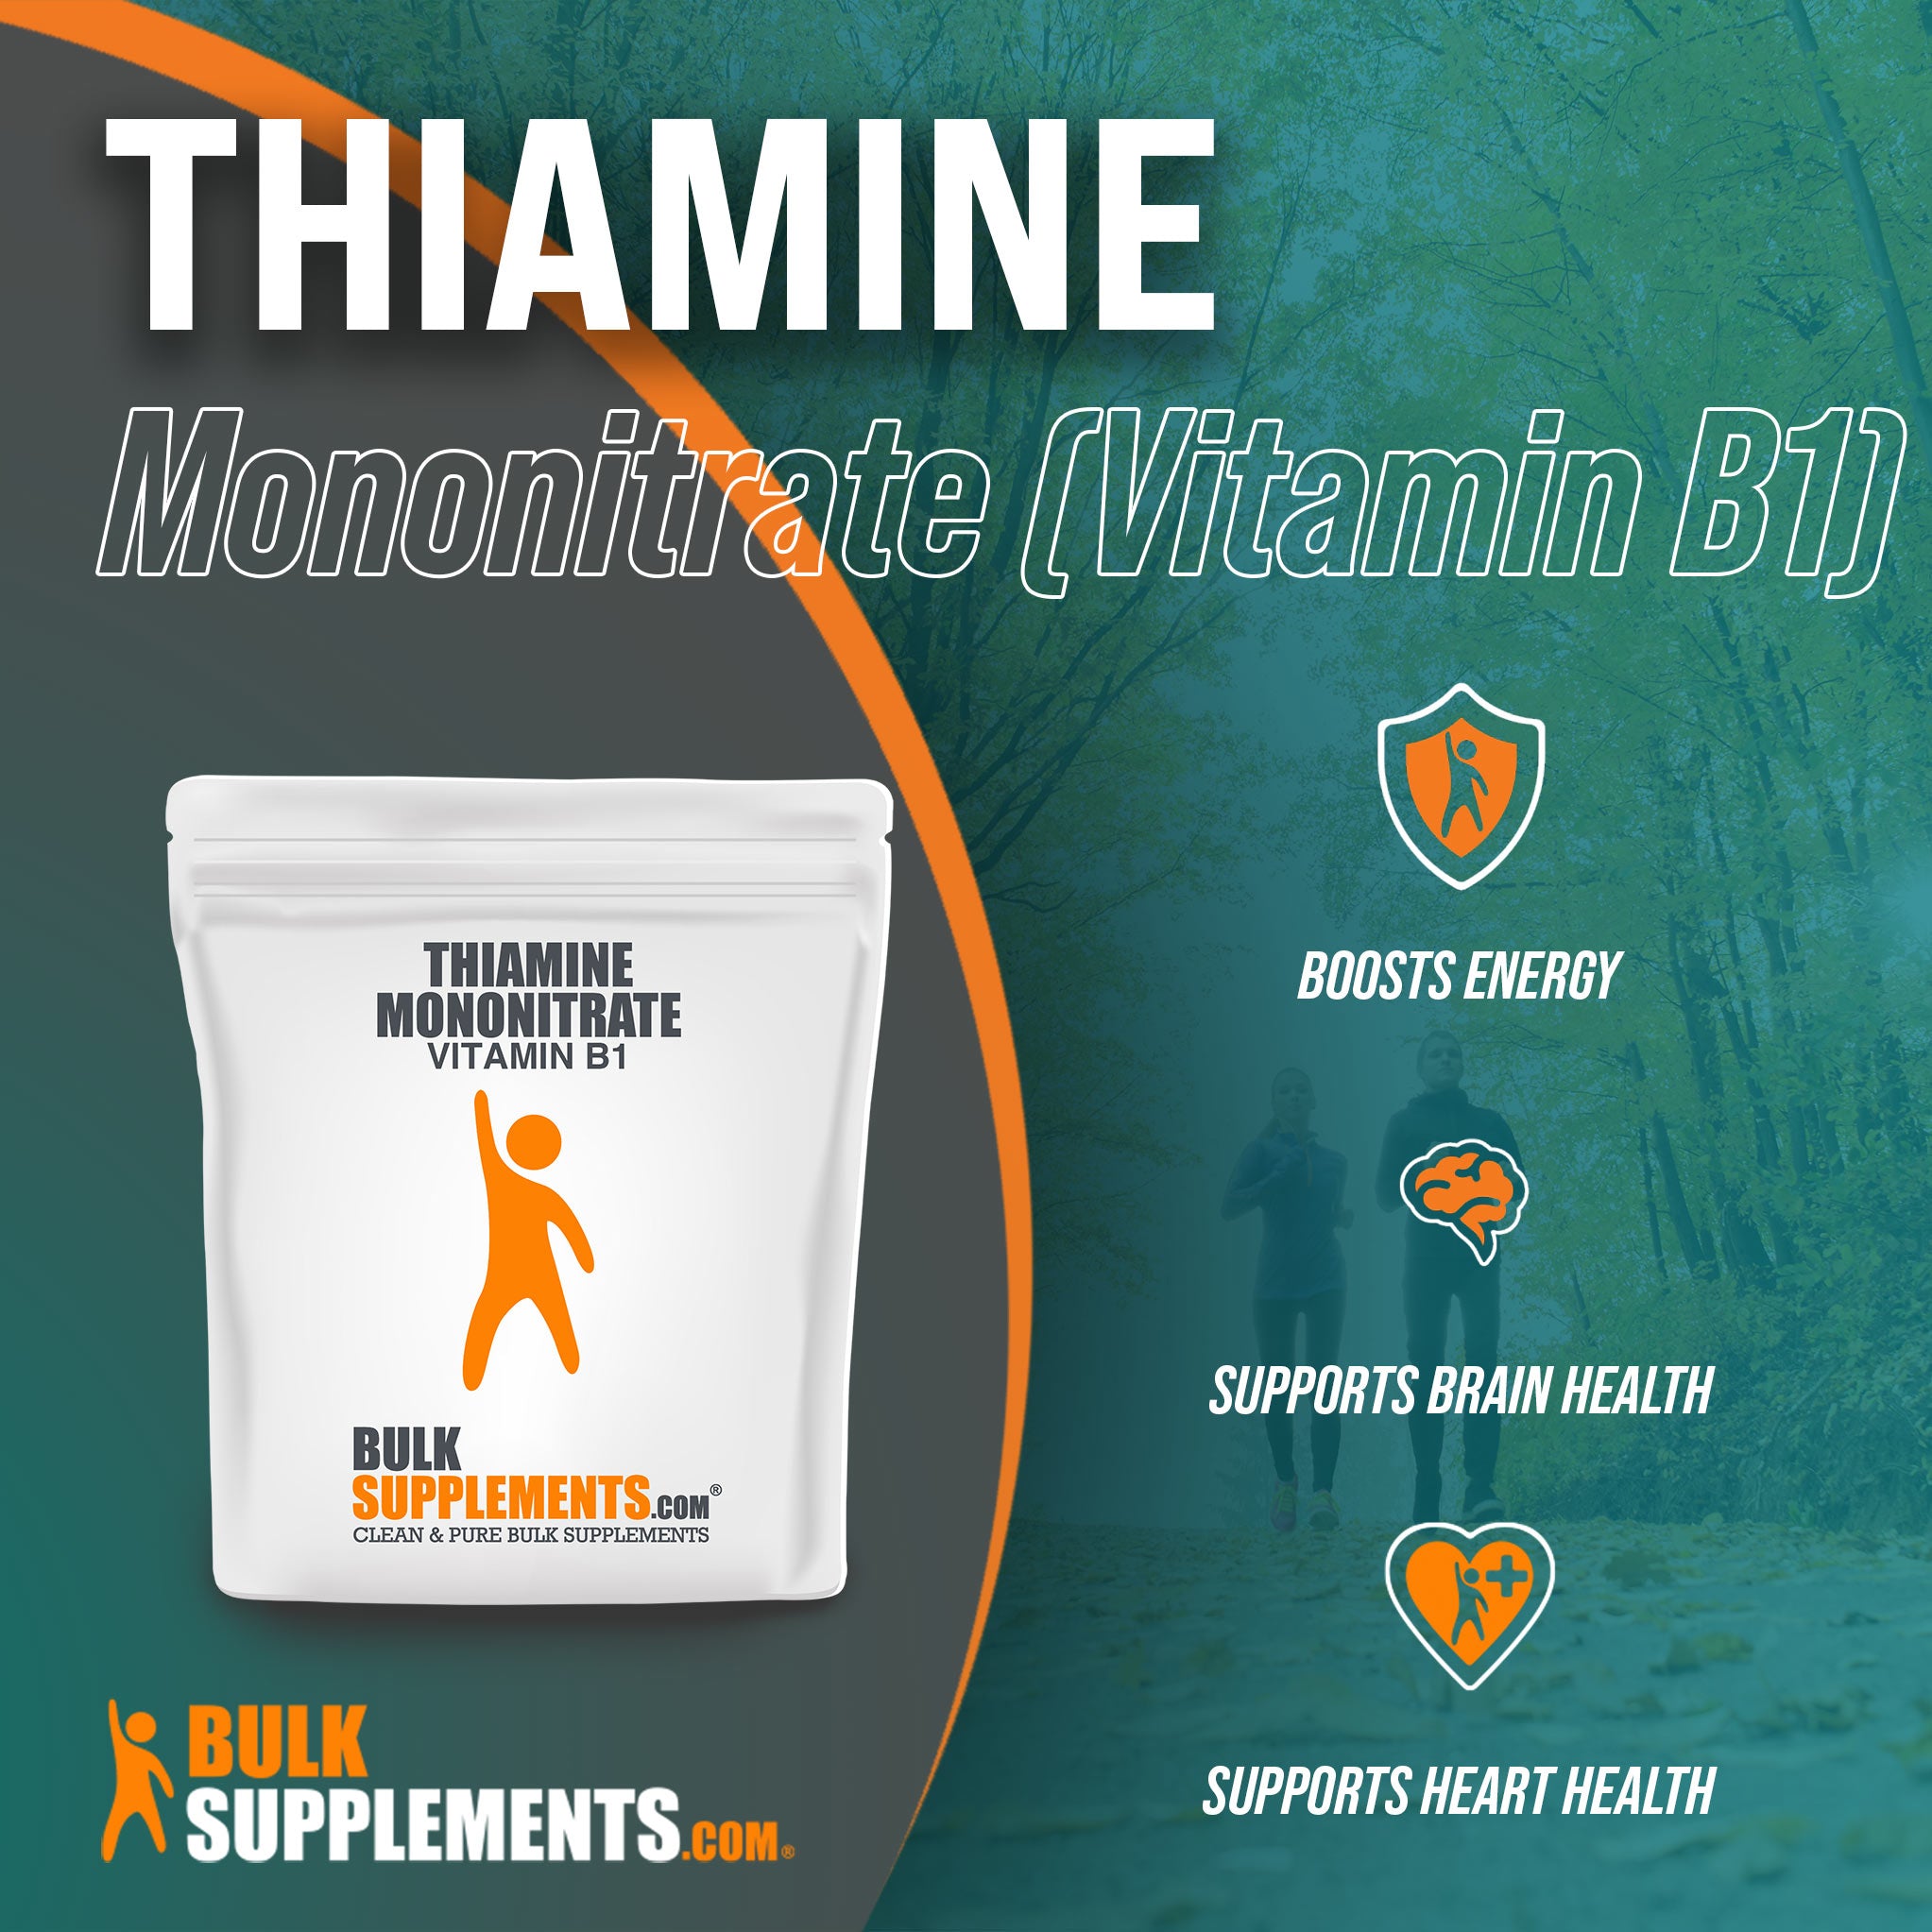 Benefits of Thiamine Mononitrate Vitamin B1: boosts energy, supports brain health, supports heart health